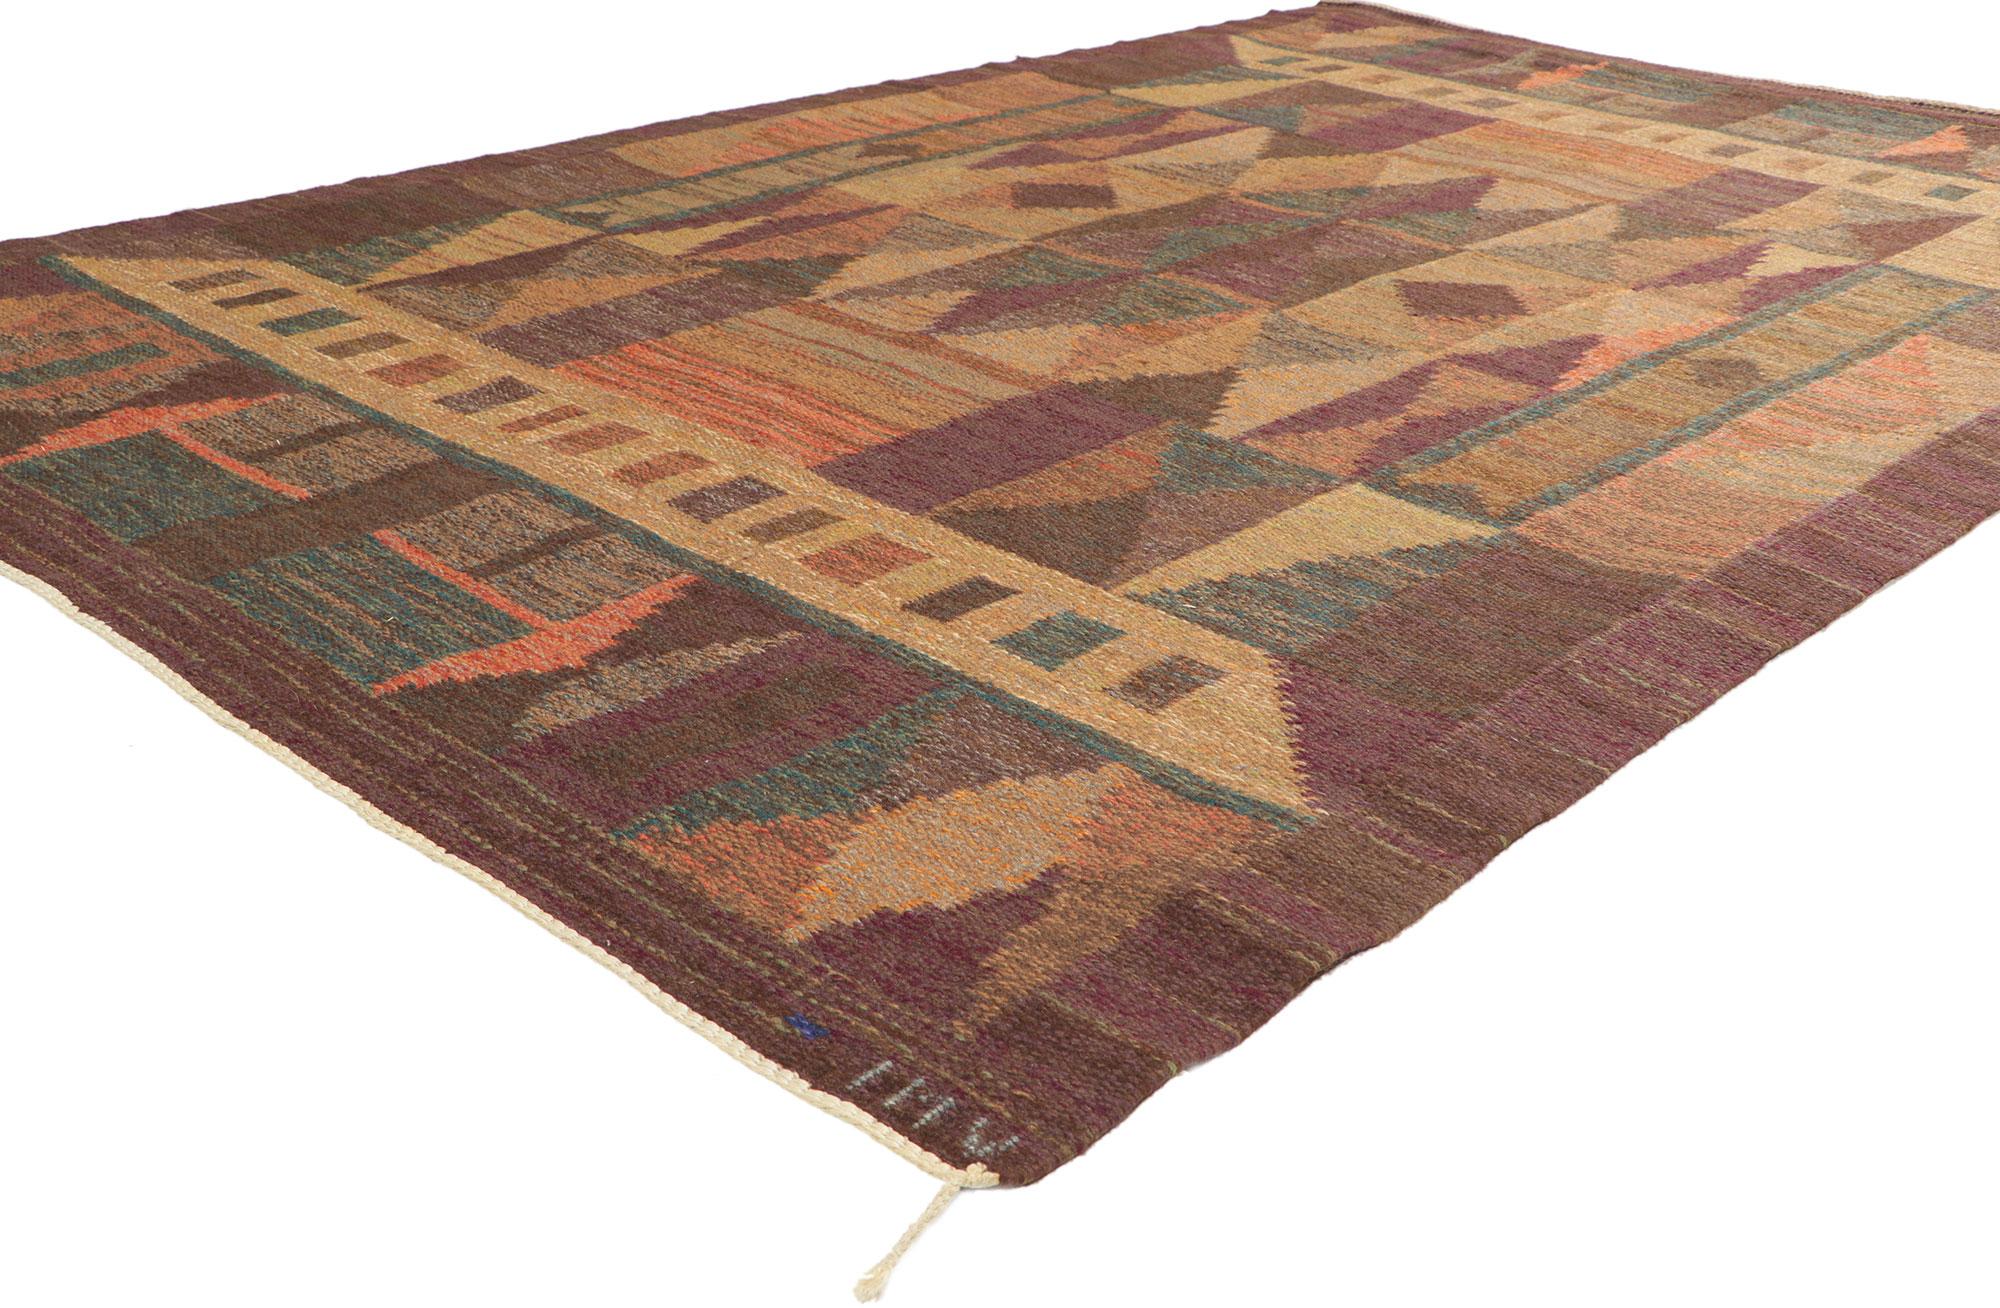 78494 Inga-Mi Vannerus Rydgren Vintage Swedish Kilim Rollakan Rug, 05'02 x 08'00. Emanating Scandinavian Modern style with incredible detail and texture, this handwoven wool Swedish rollakan rug is a captivating vision of woven beauty. The